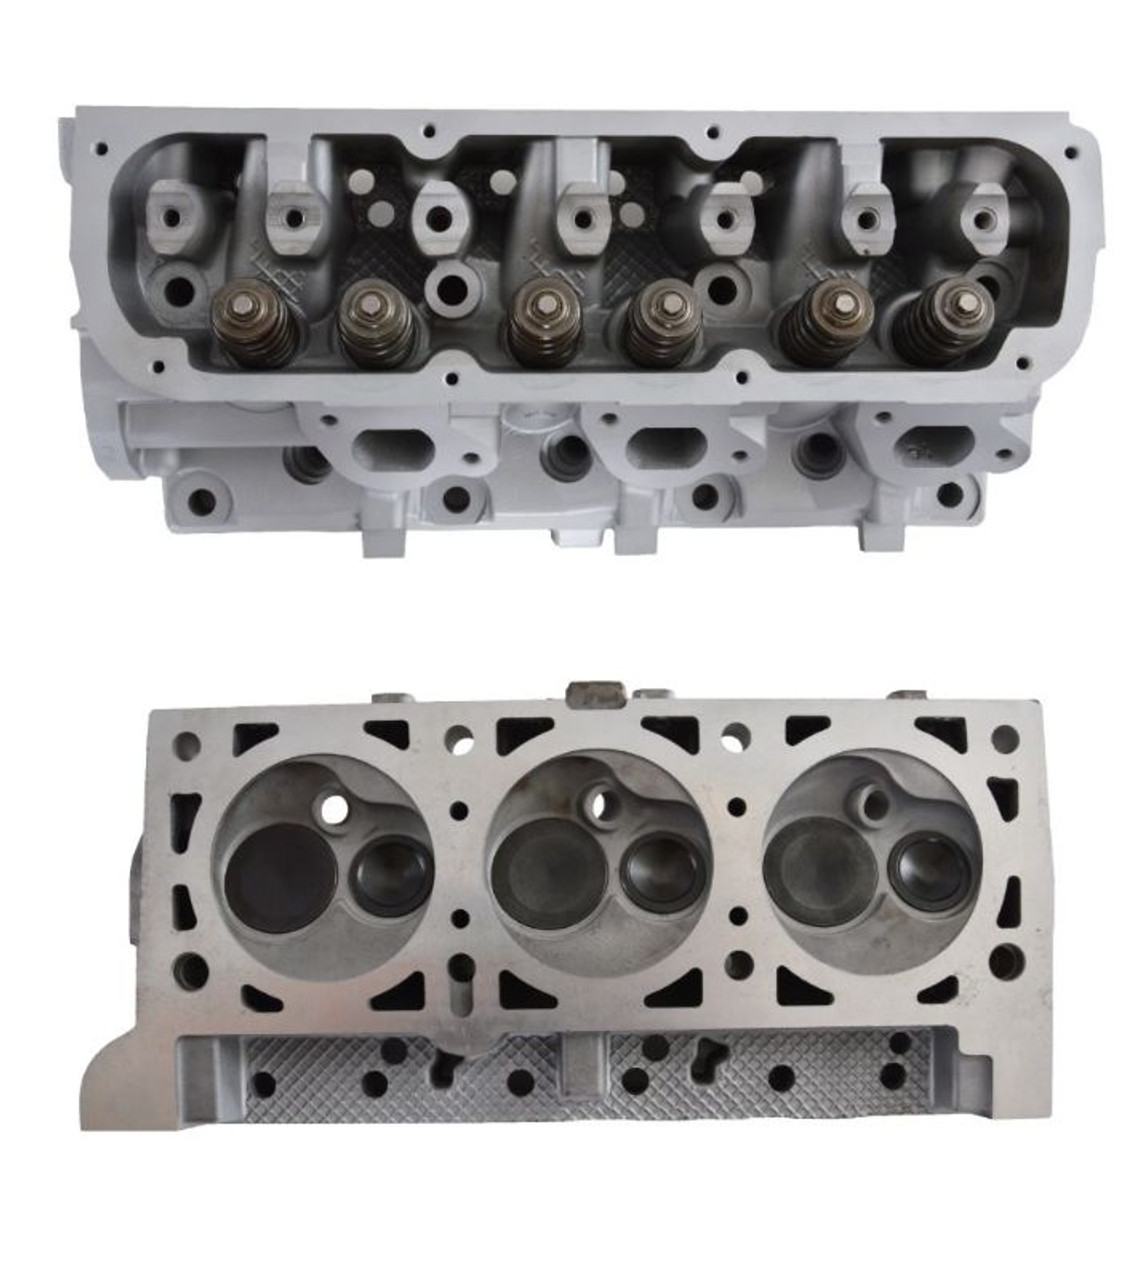 2001 Chrysler Town & Country 3.8L Engine Cylinder Head Assembly CH1084R -1